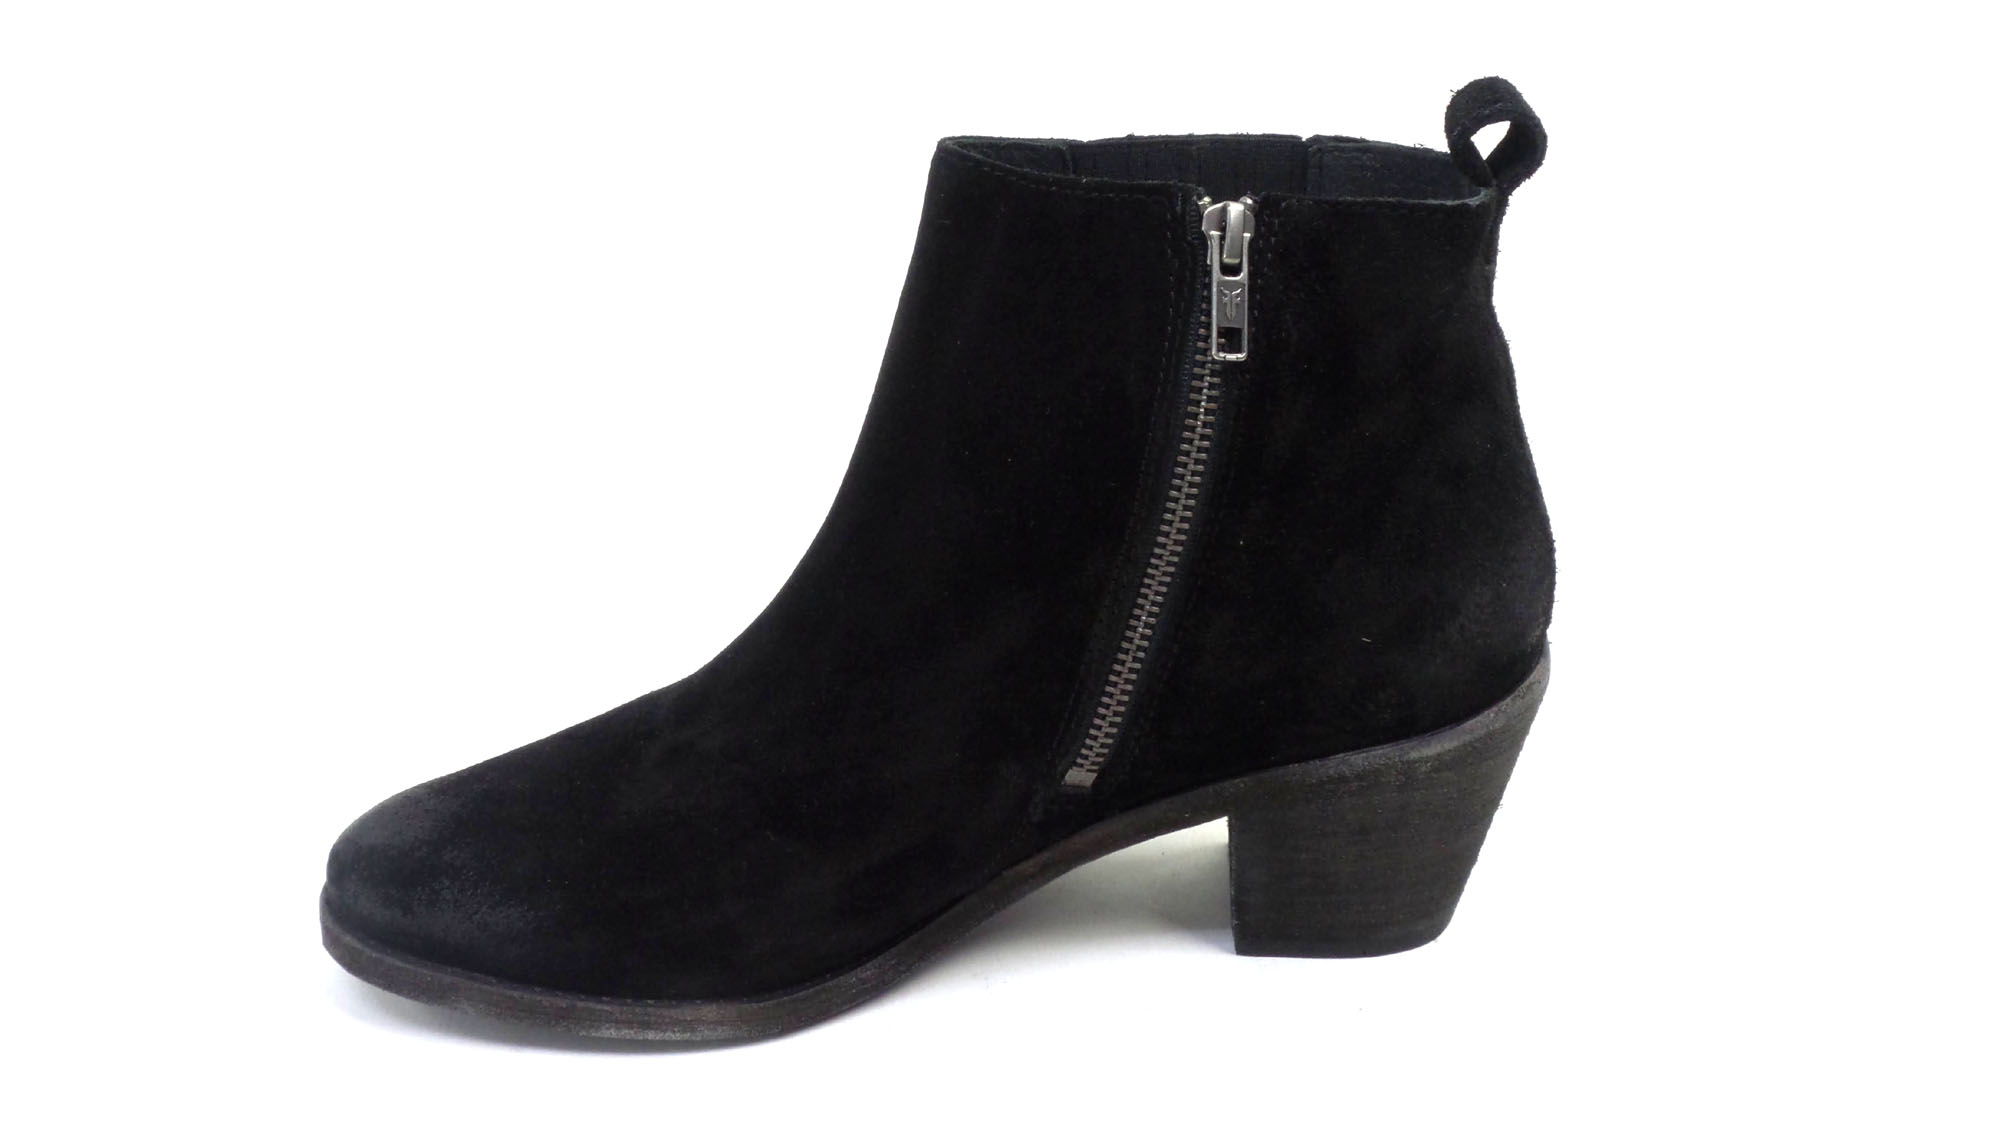 Frye Suede Gored Ankle Boots Alton Chelsea Black Leather | eBay